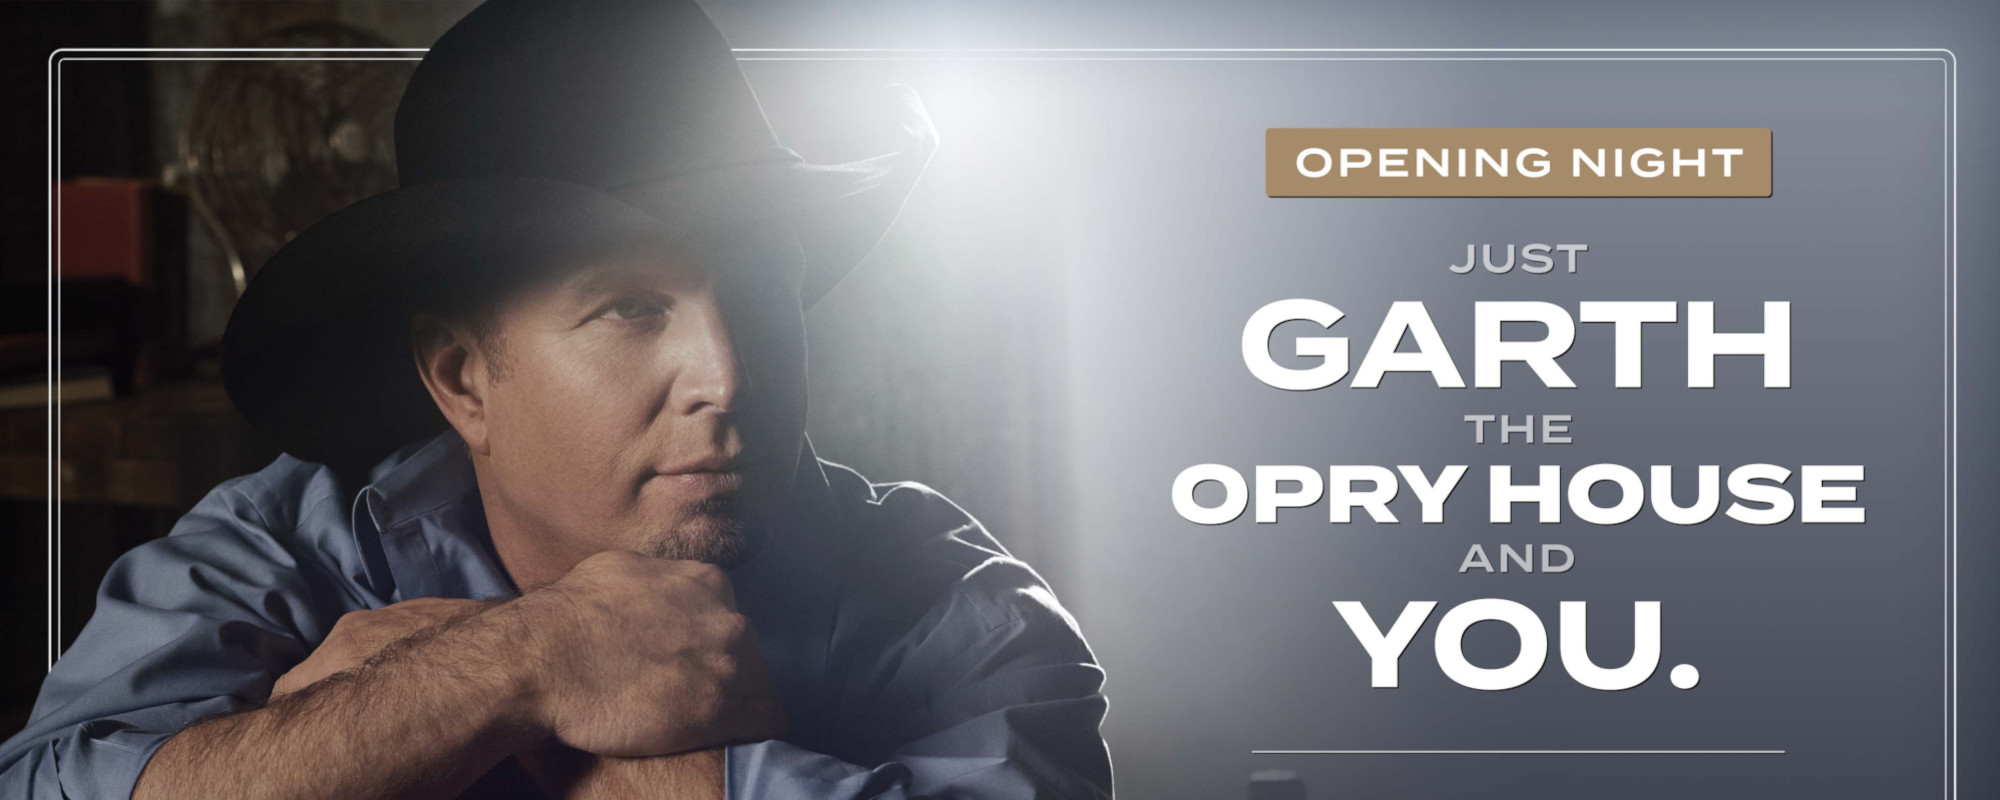 Garth Brooks Adds Third Show at Grand Ole Opry After Back-to-Back Sell Outs of Ryman Shows